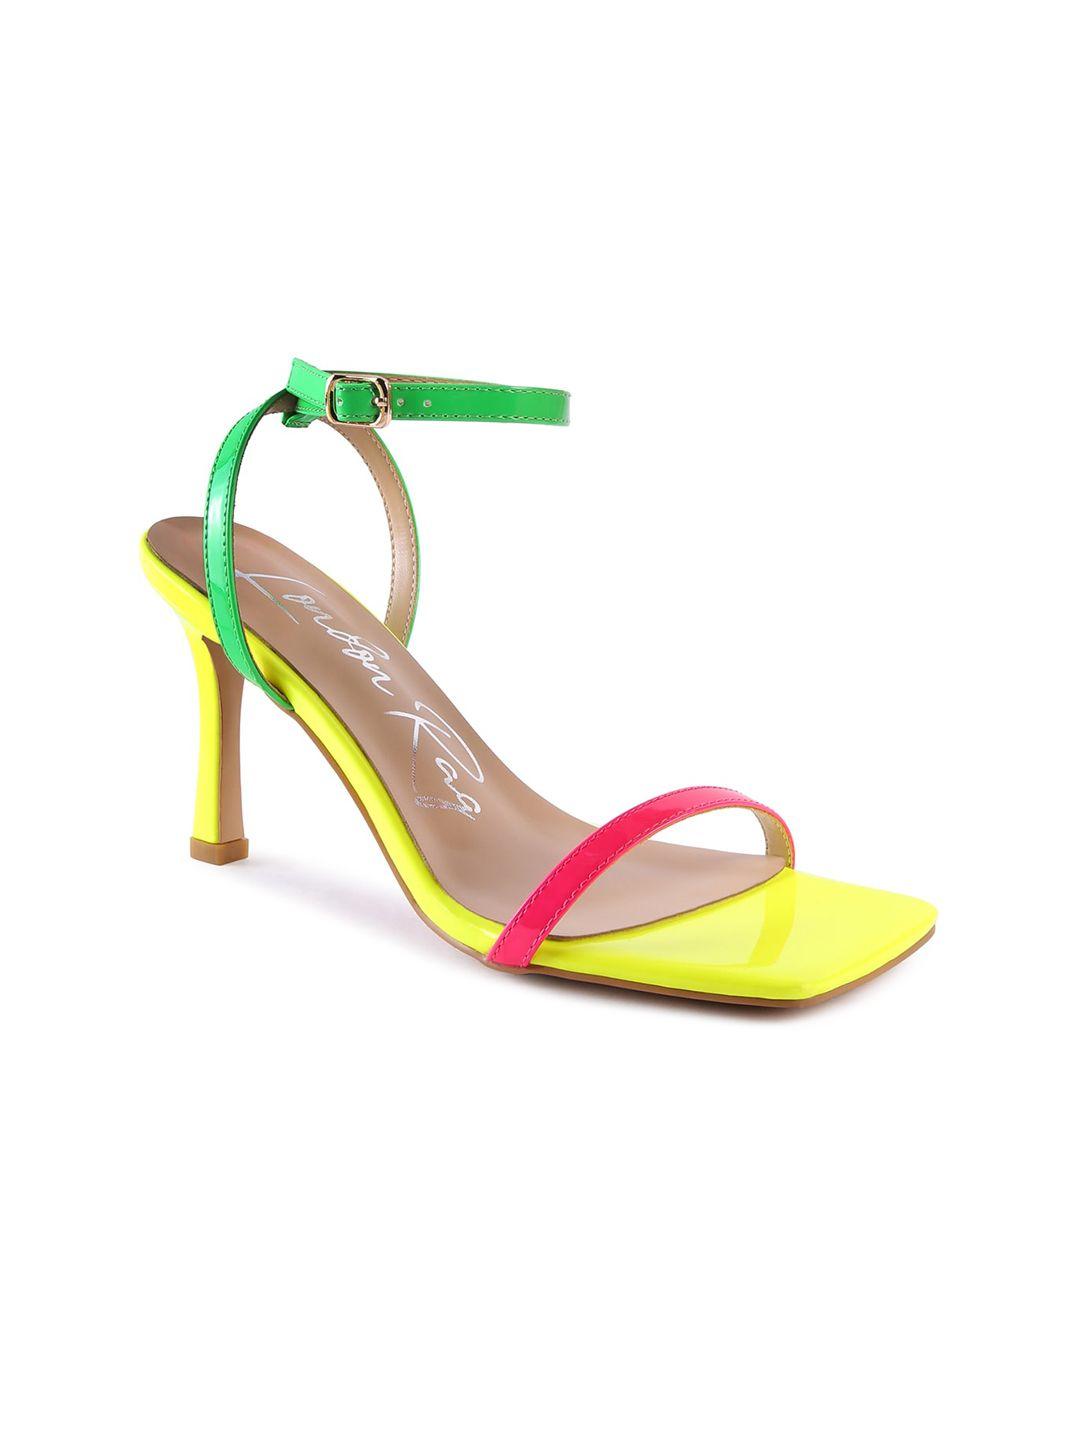 london rag multicoloured party stiletto sandals with buckles